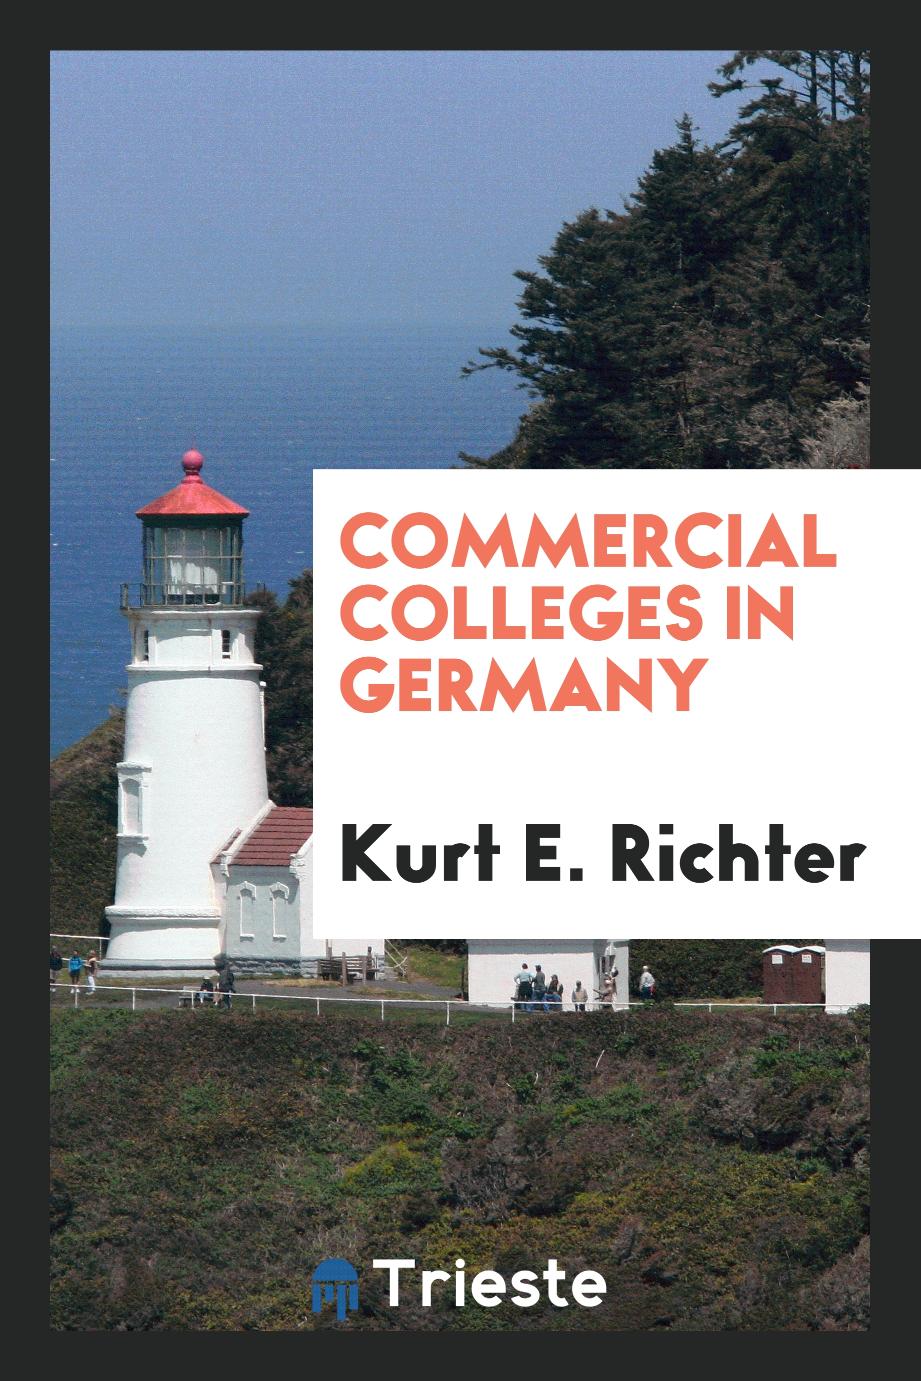 Commercial colleges in Germany